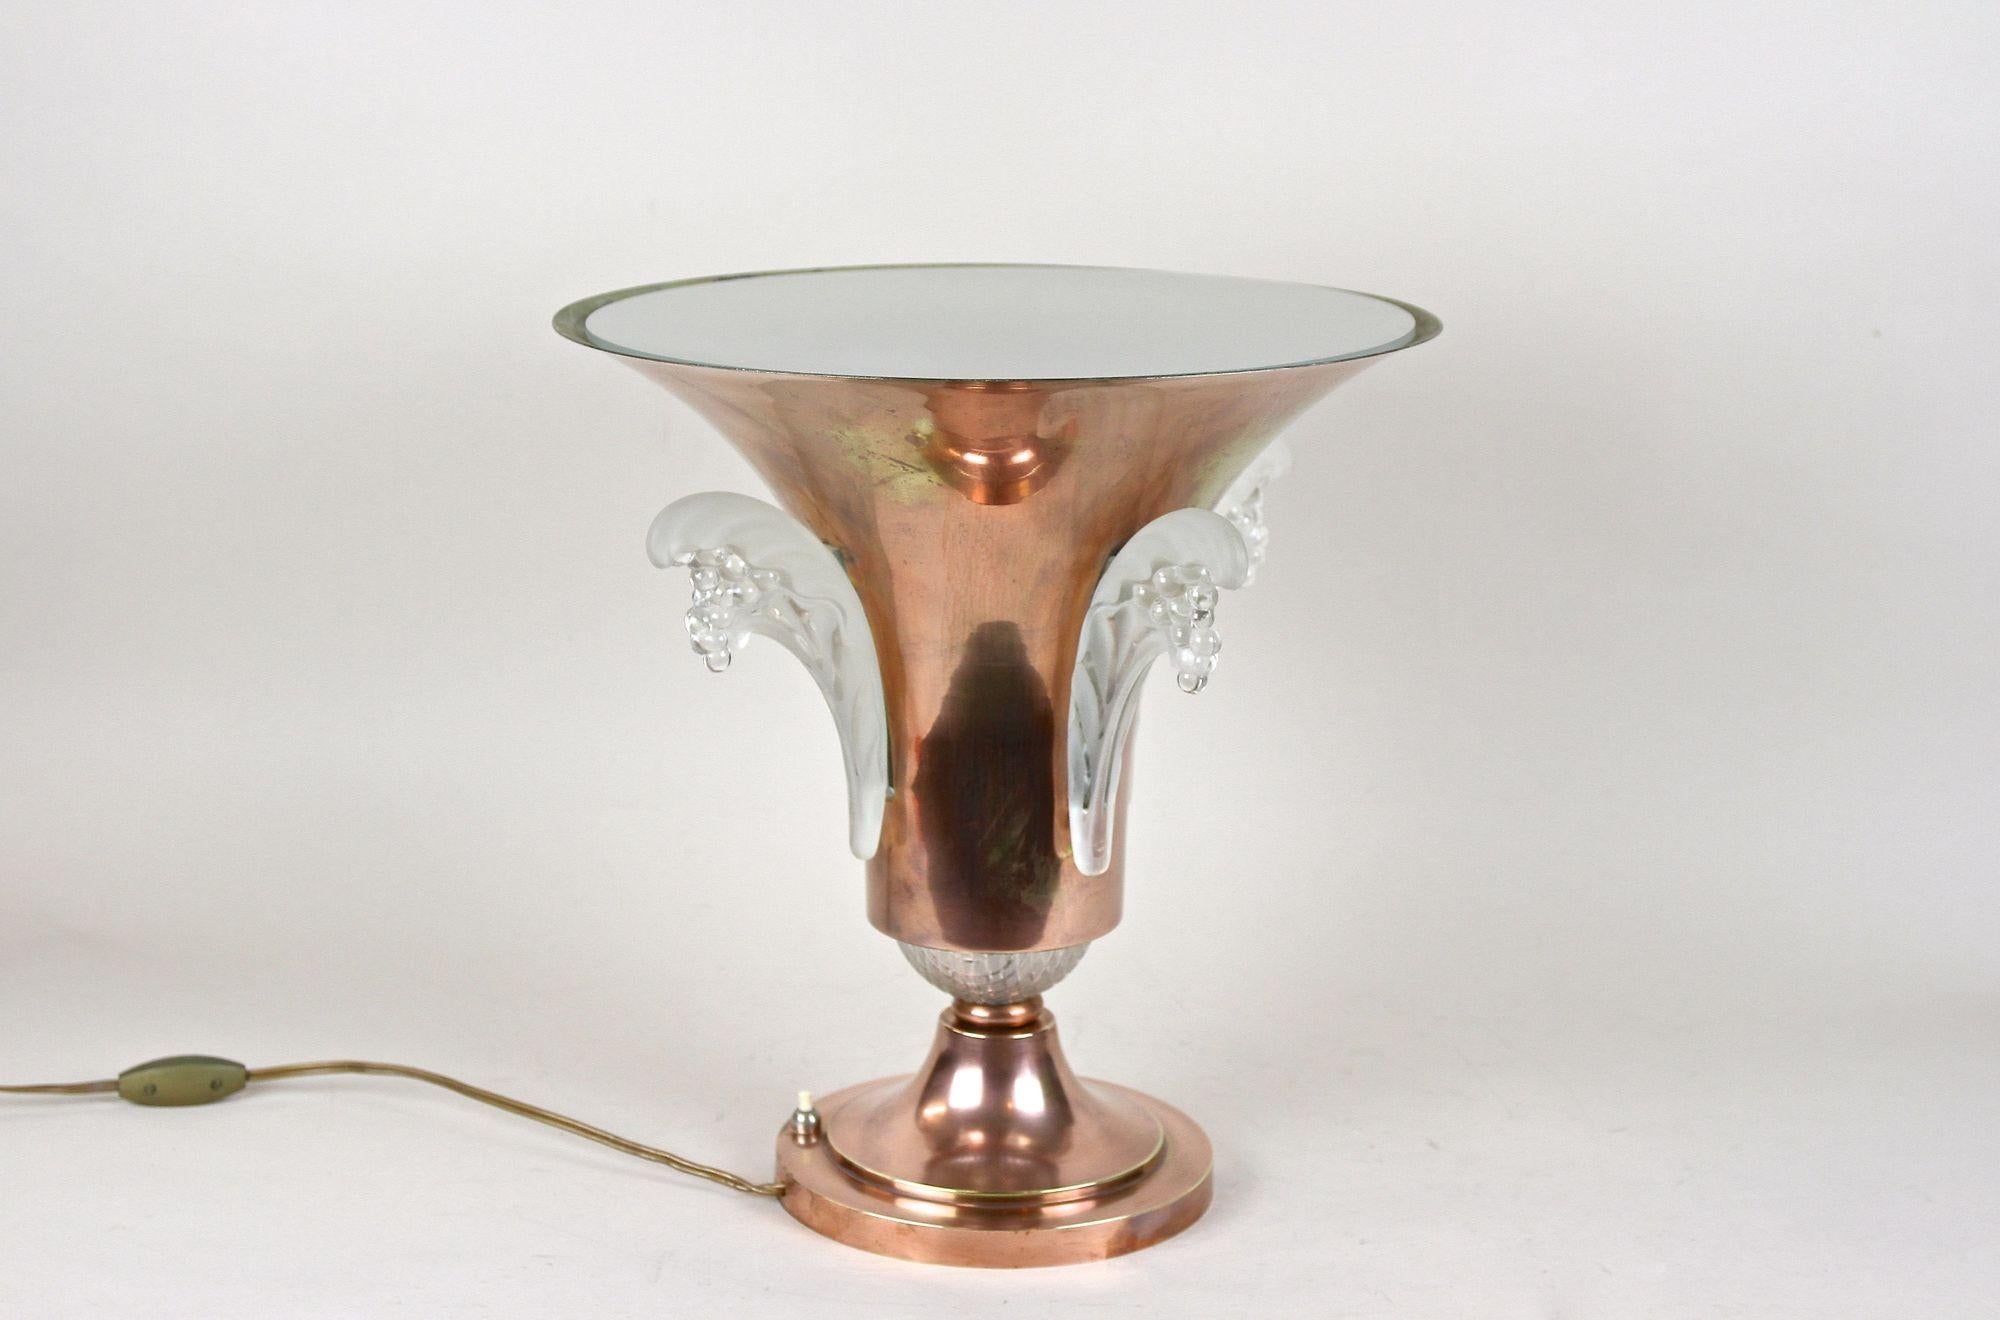 Art Deco Copper Table Lamp with Lalique Glass Elements, France, circa 1925 For Sale 8